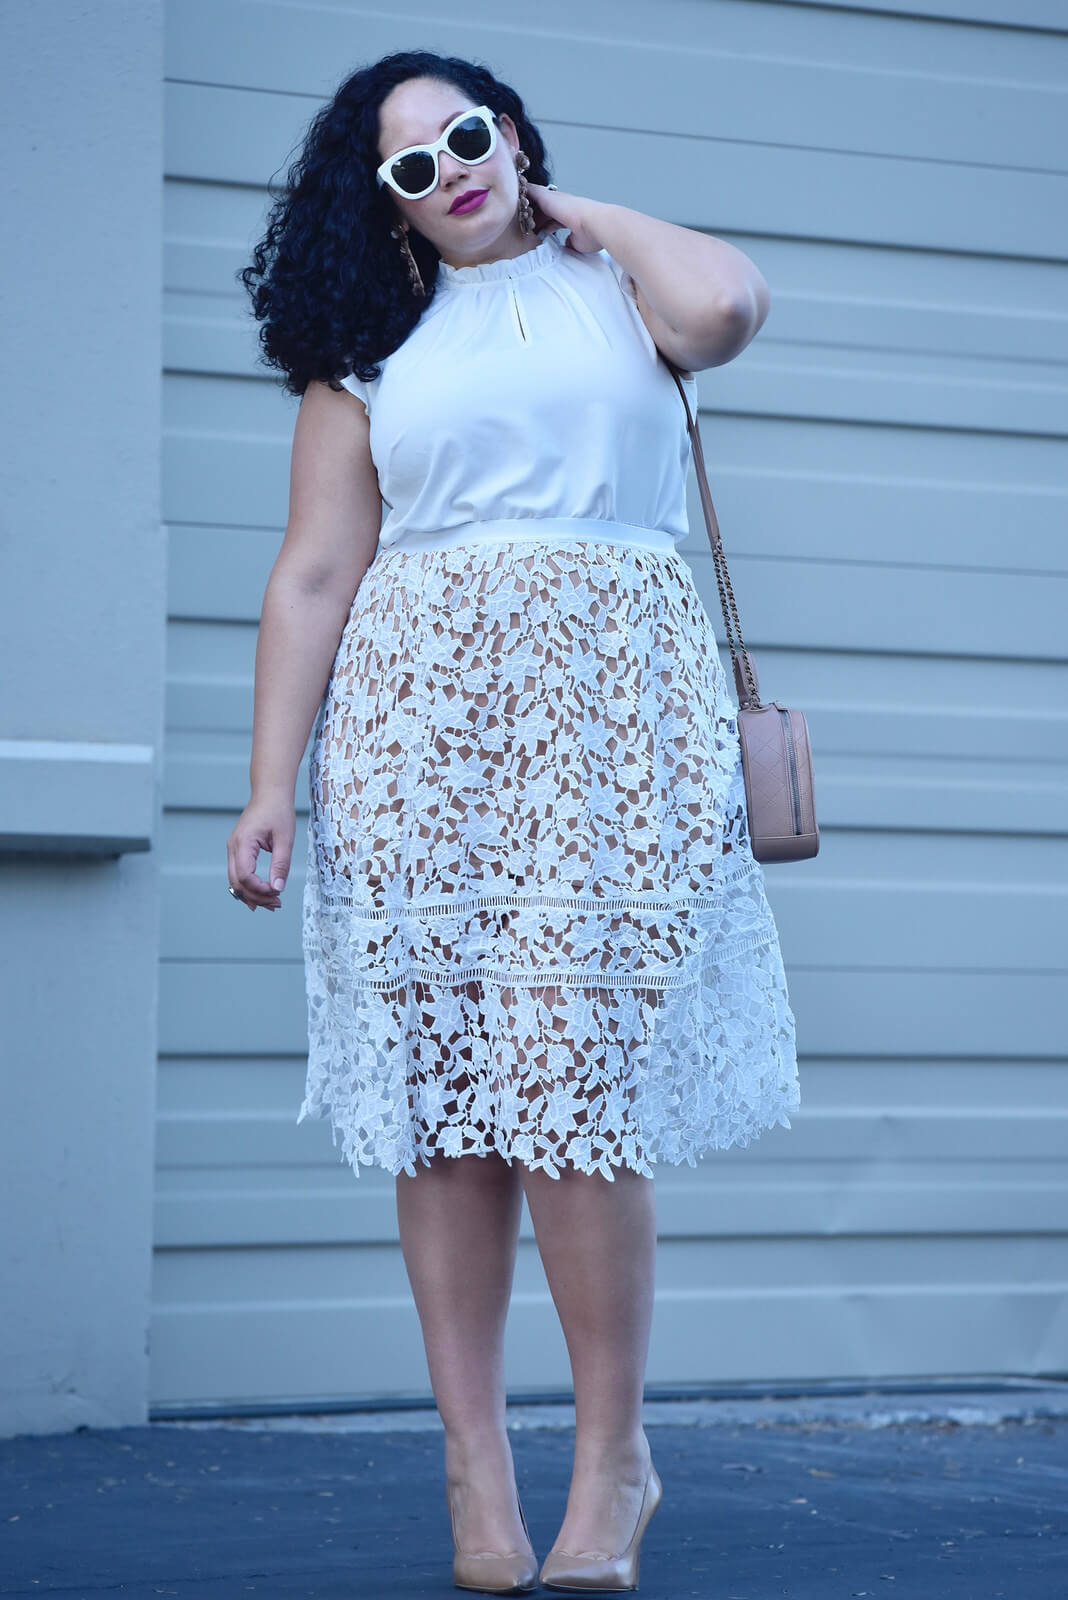 The Classy Girl’s Guide to Wearing the Nude Trend via @GirlWithCurves